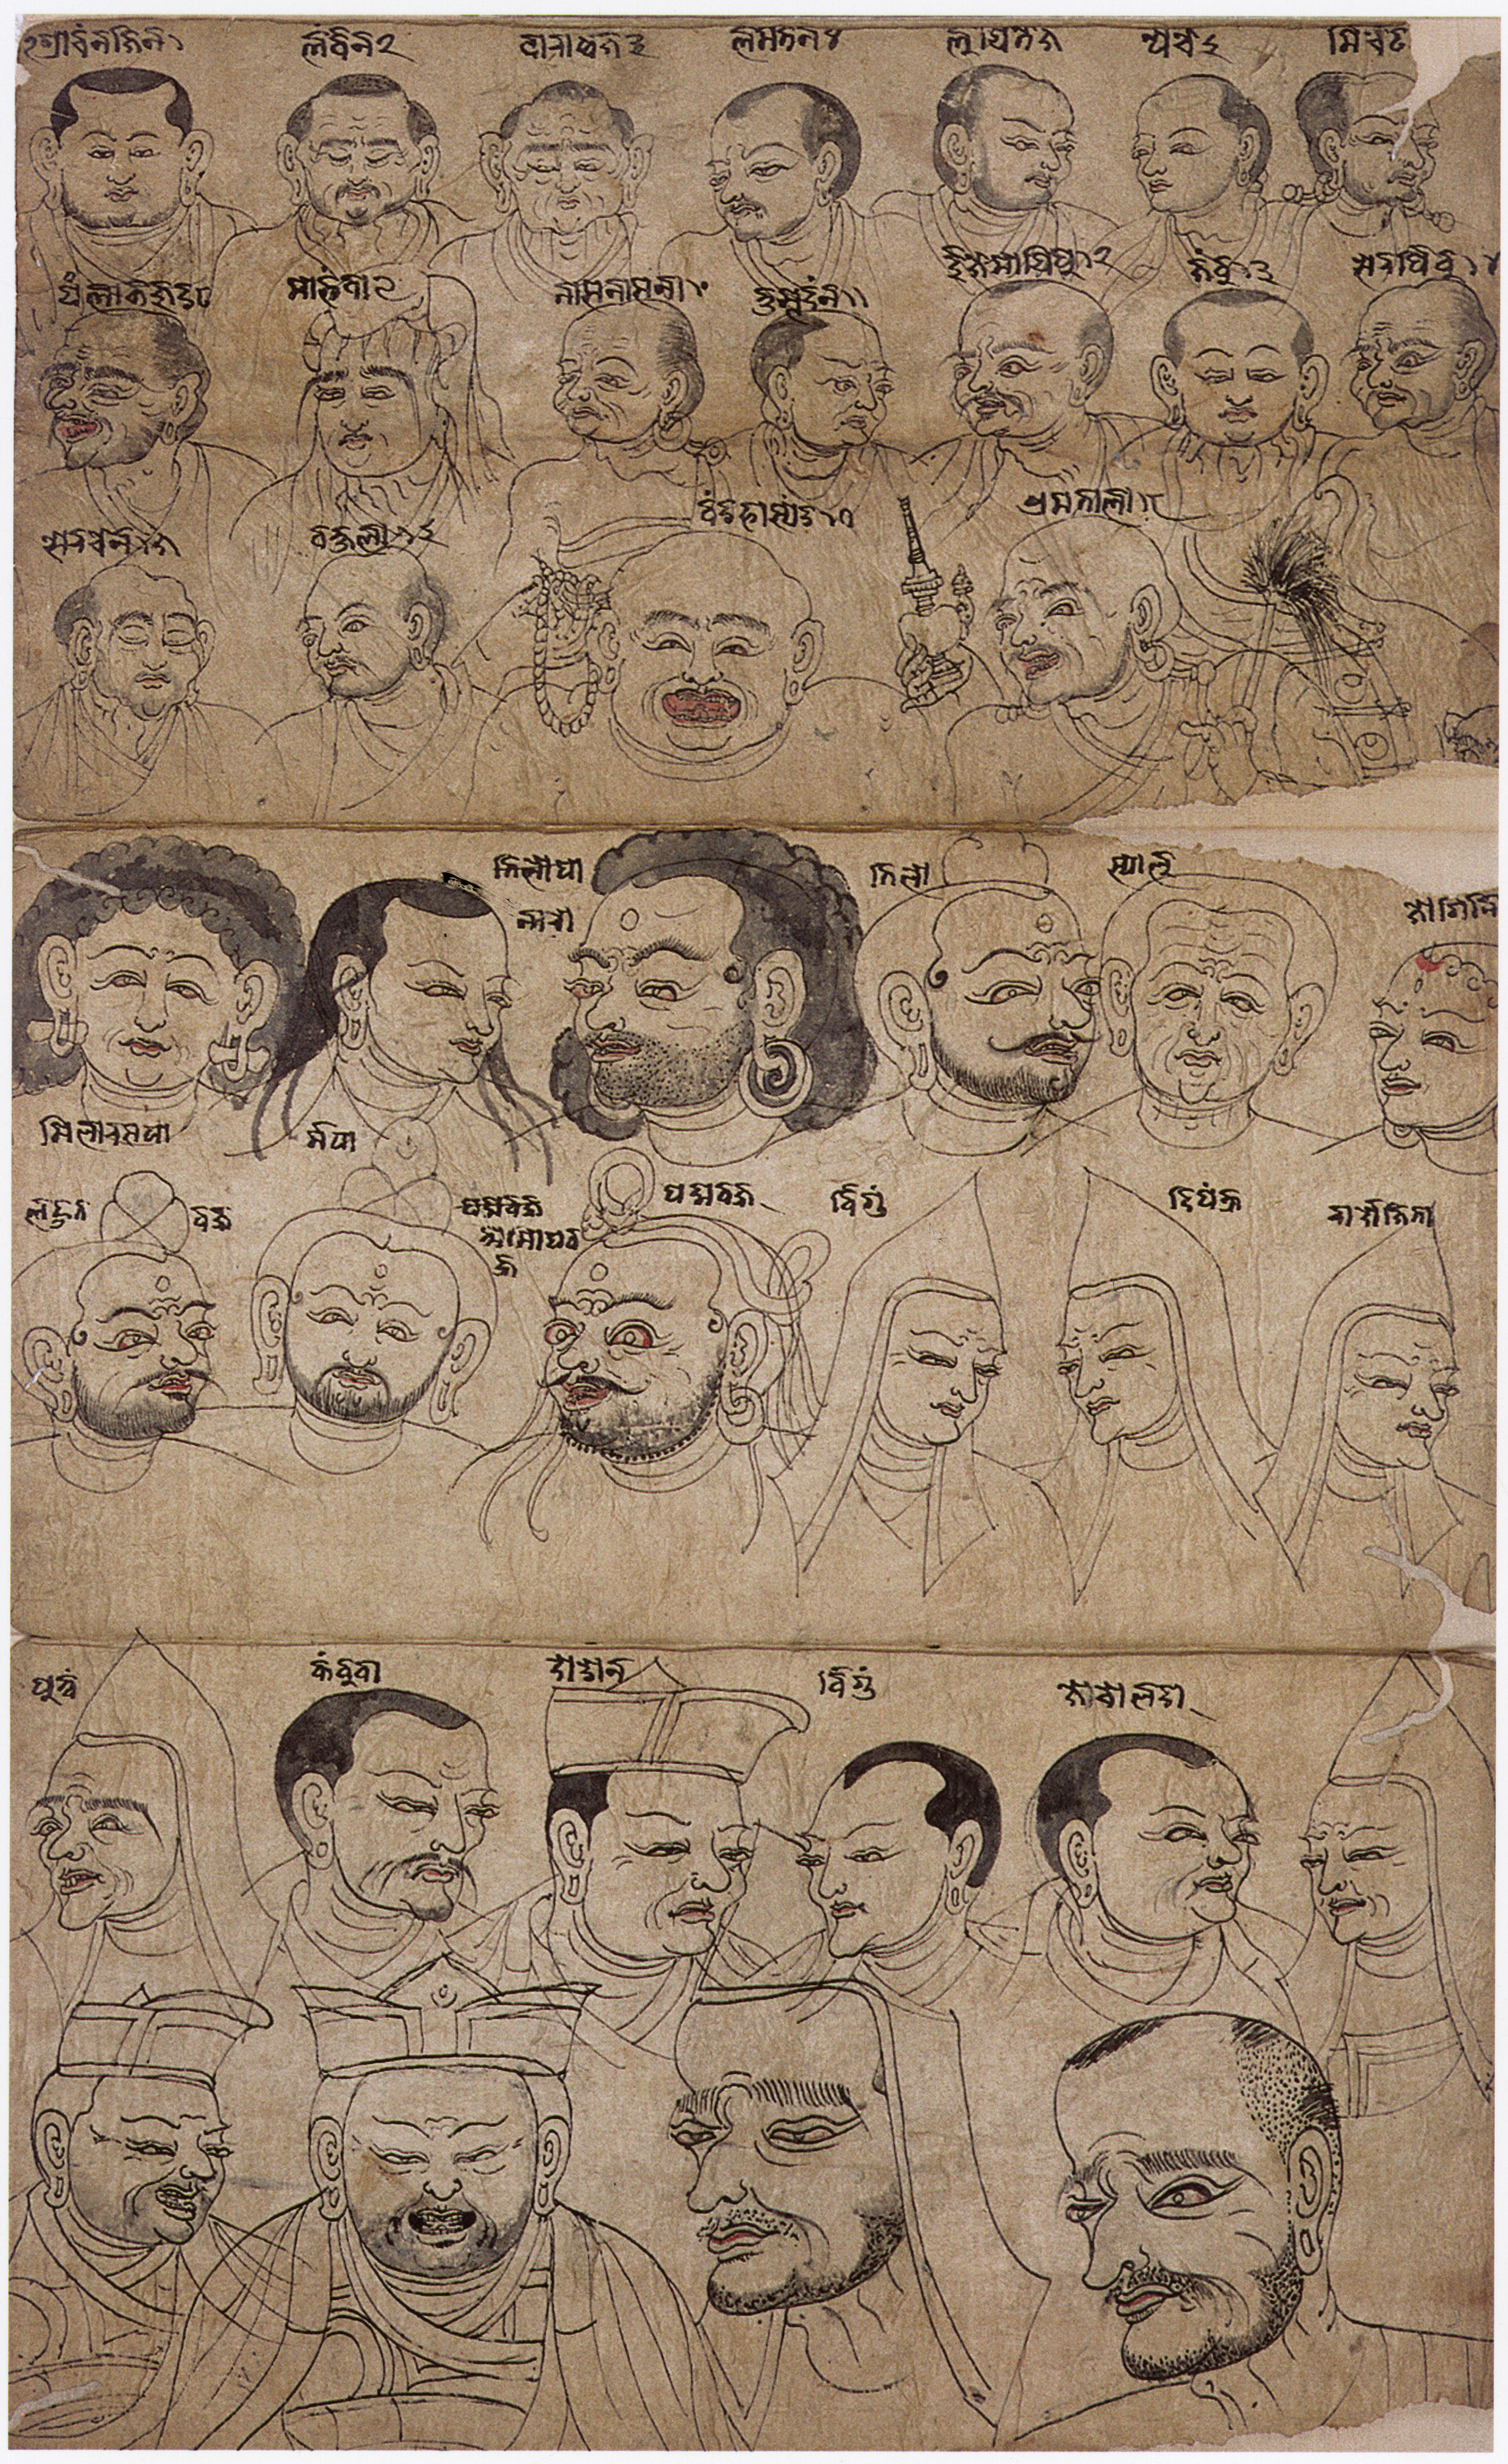 Three pages arranged vertically: each page features dense collection of three-quarter portraits with labels